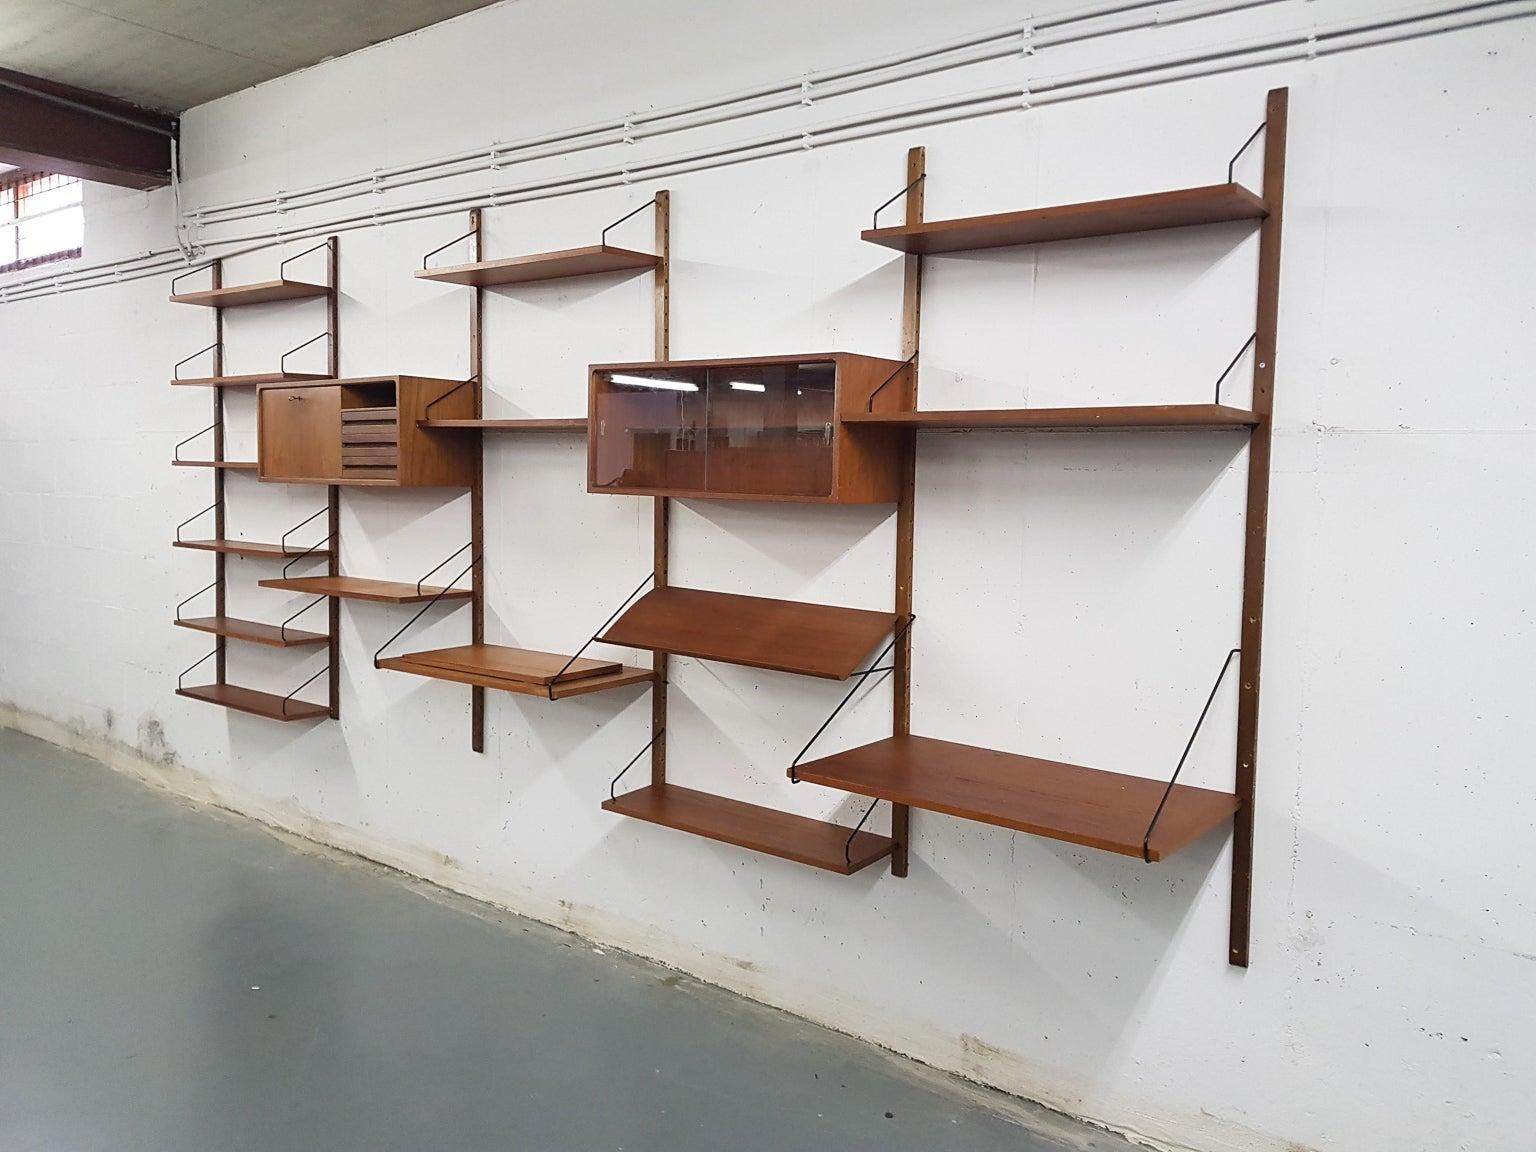 Large Danish design wall system or shelving unit by Poul Cadovius for Royal System, designed in Denmark in 1948.

When you ask someone to think of an European midcentury wall unit, most will probably think of Poul Cadovius and his shelving system.